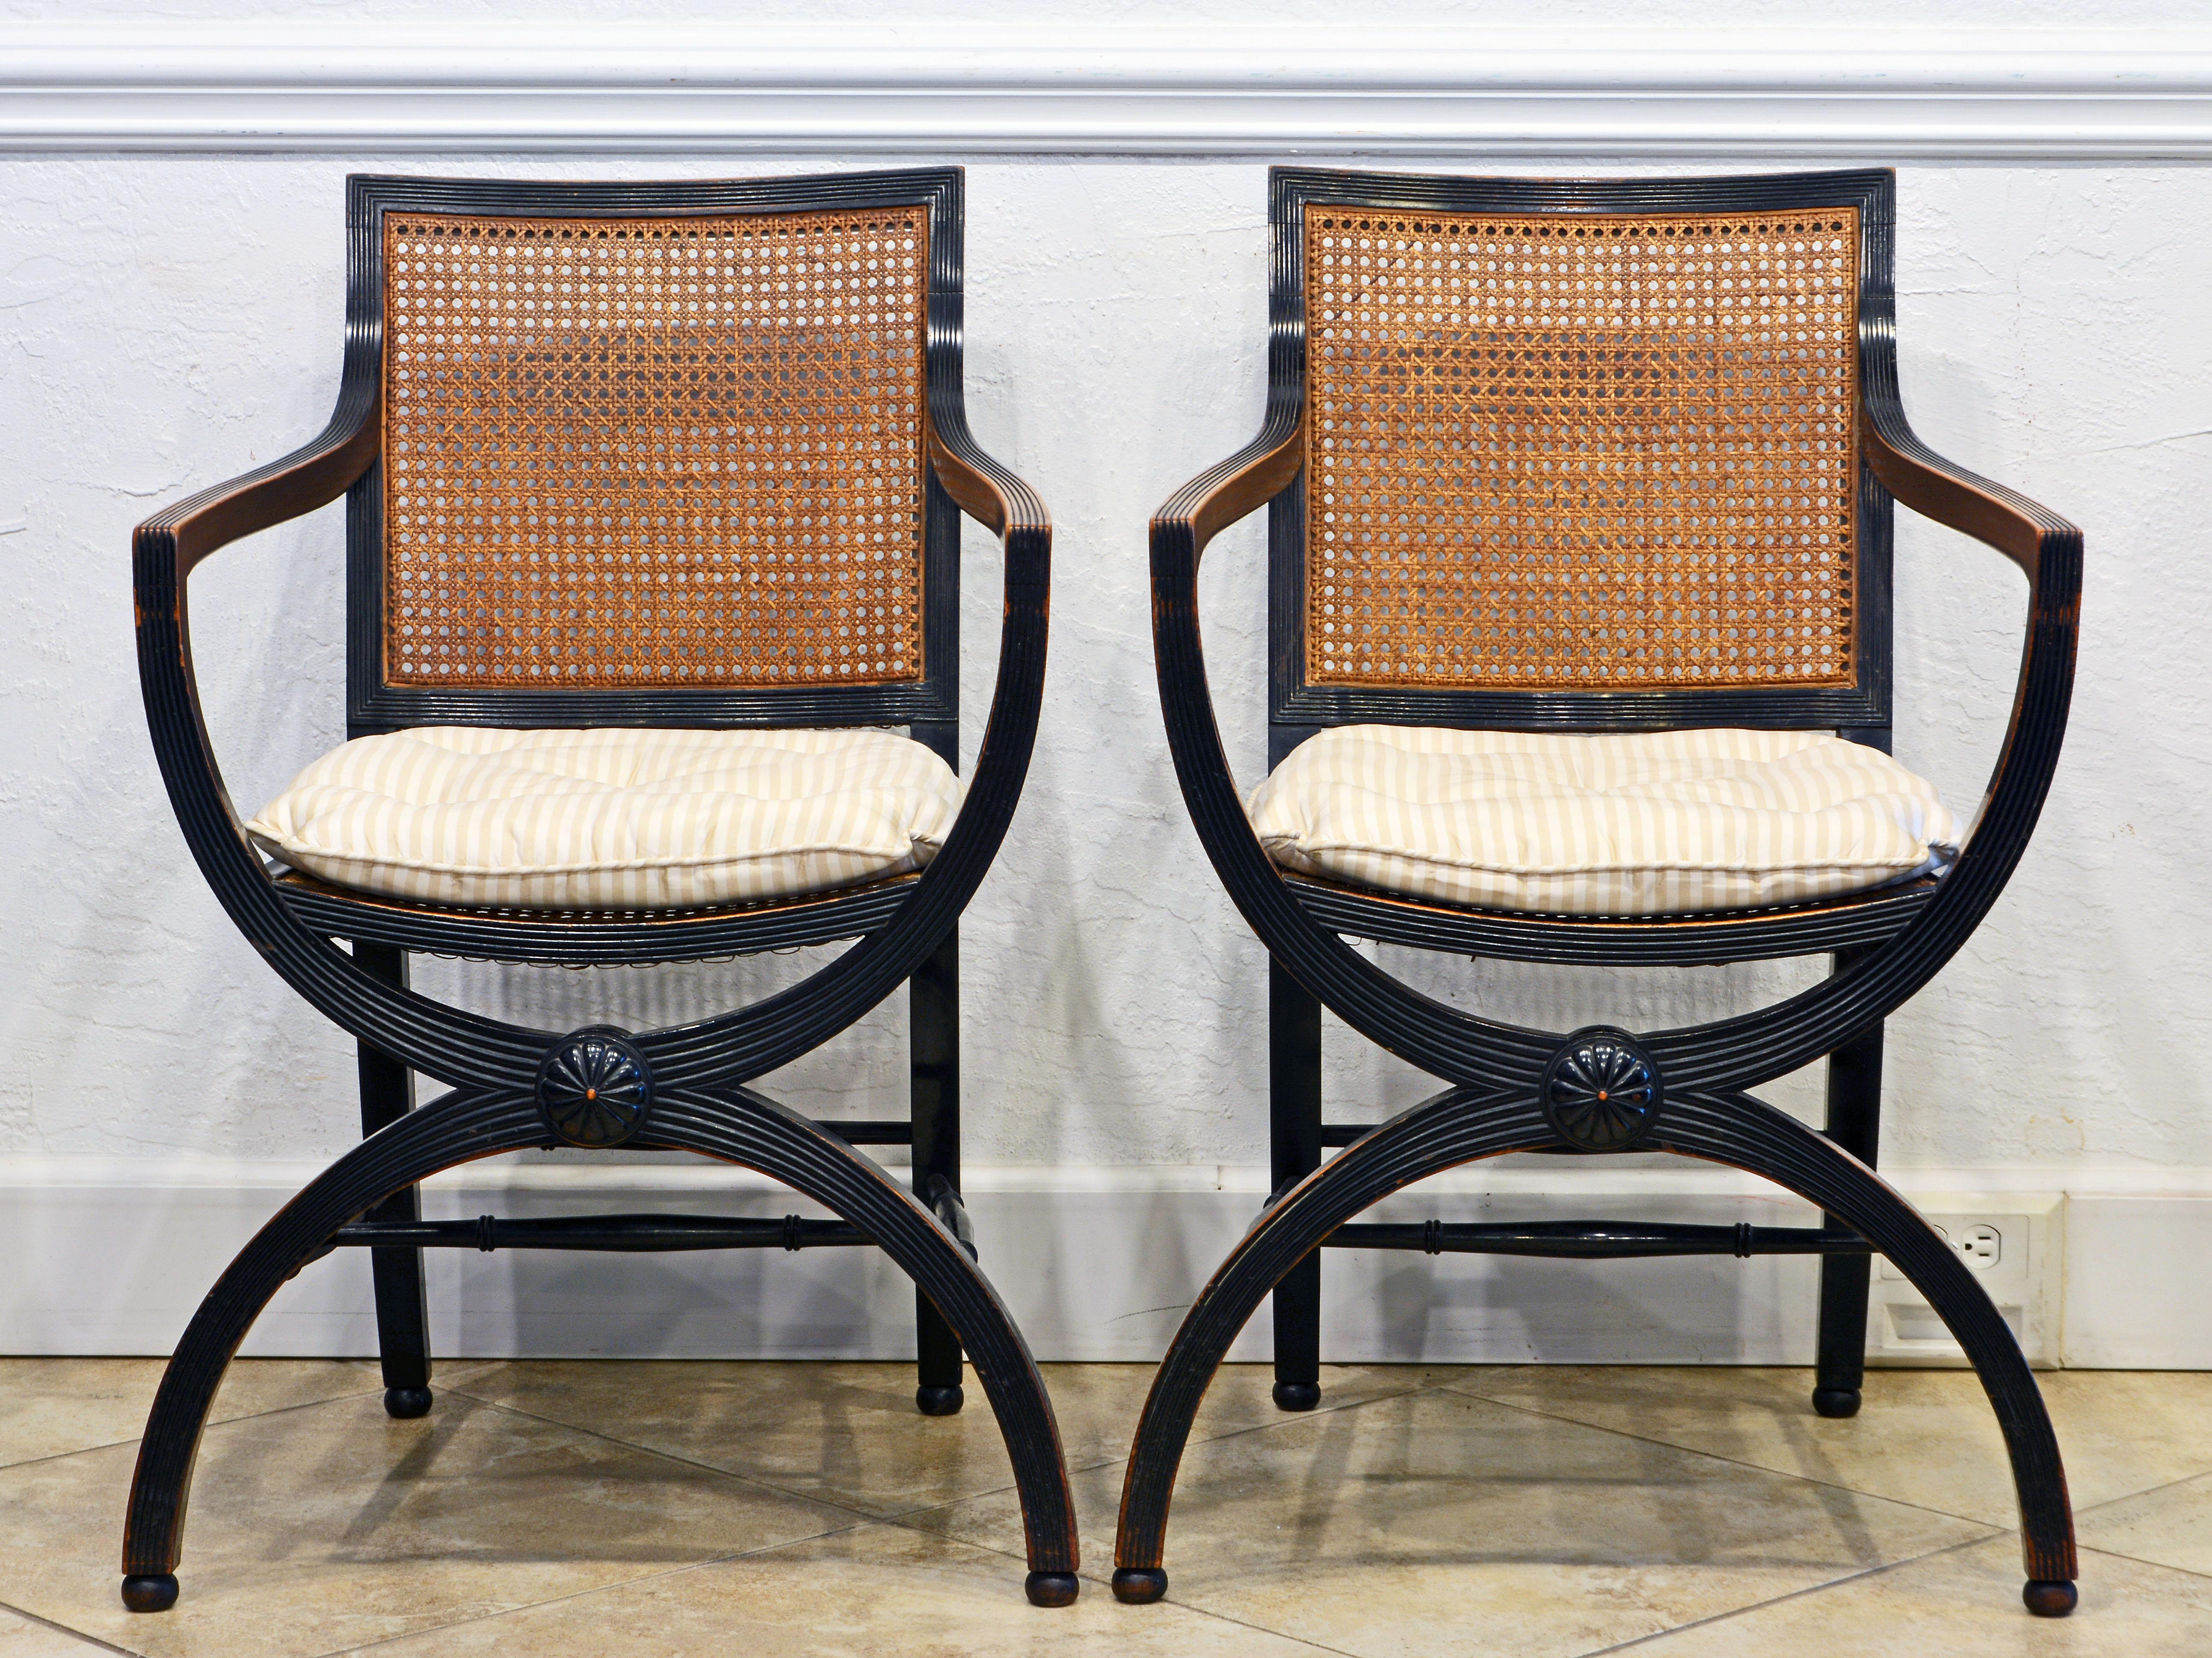 This distinguished pair of Regency armchairs in the manner of Thomas Hope feature elegant reeded and ebonized frames inspired by the classical curule type of legs. Seats and backrests are traditionally caned and later supplied with tasteful